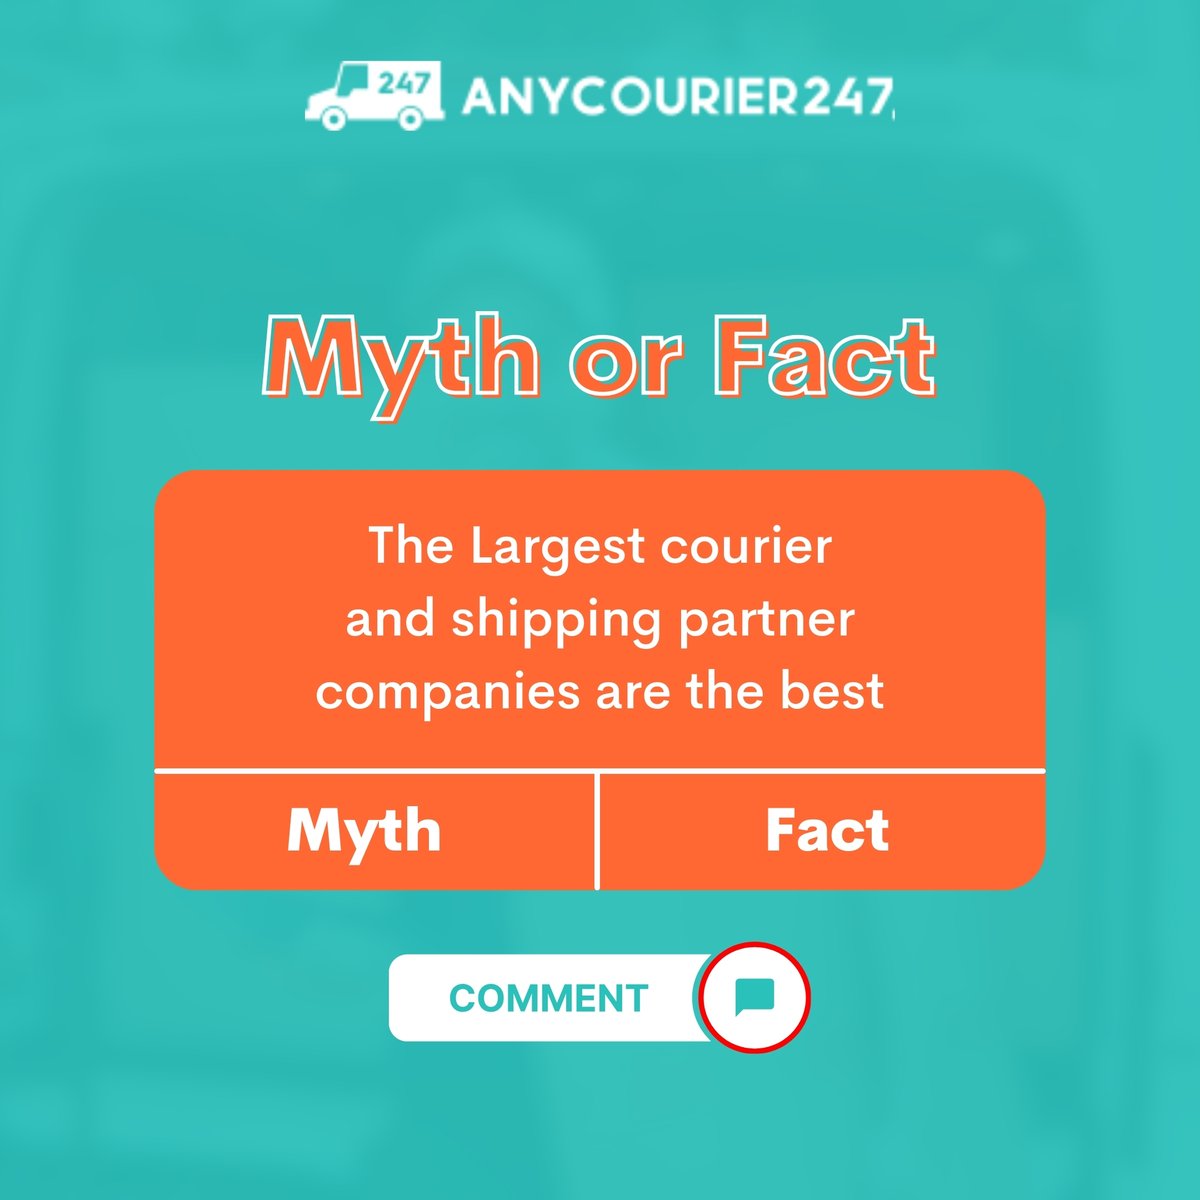 Size isn't everything! While large courier companies have extensive reach, smaller regional players can offer faster delivery times and more personalized service. 👋🚚   Do your research to find the best fit for your needs! 📦💼 #shippingtips #informeddecisions
#anycourier247